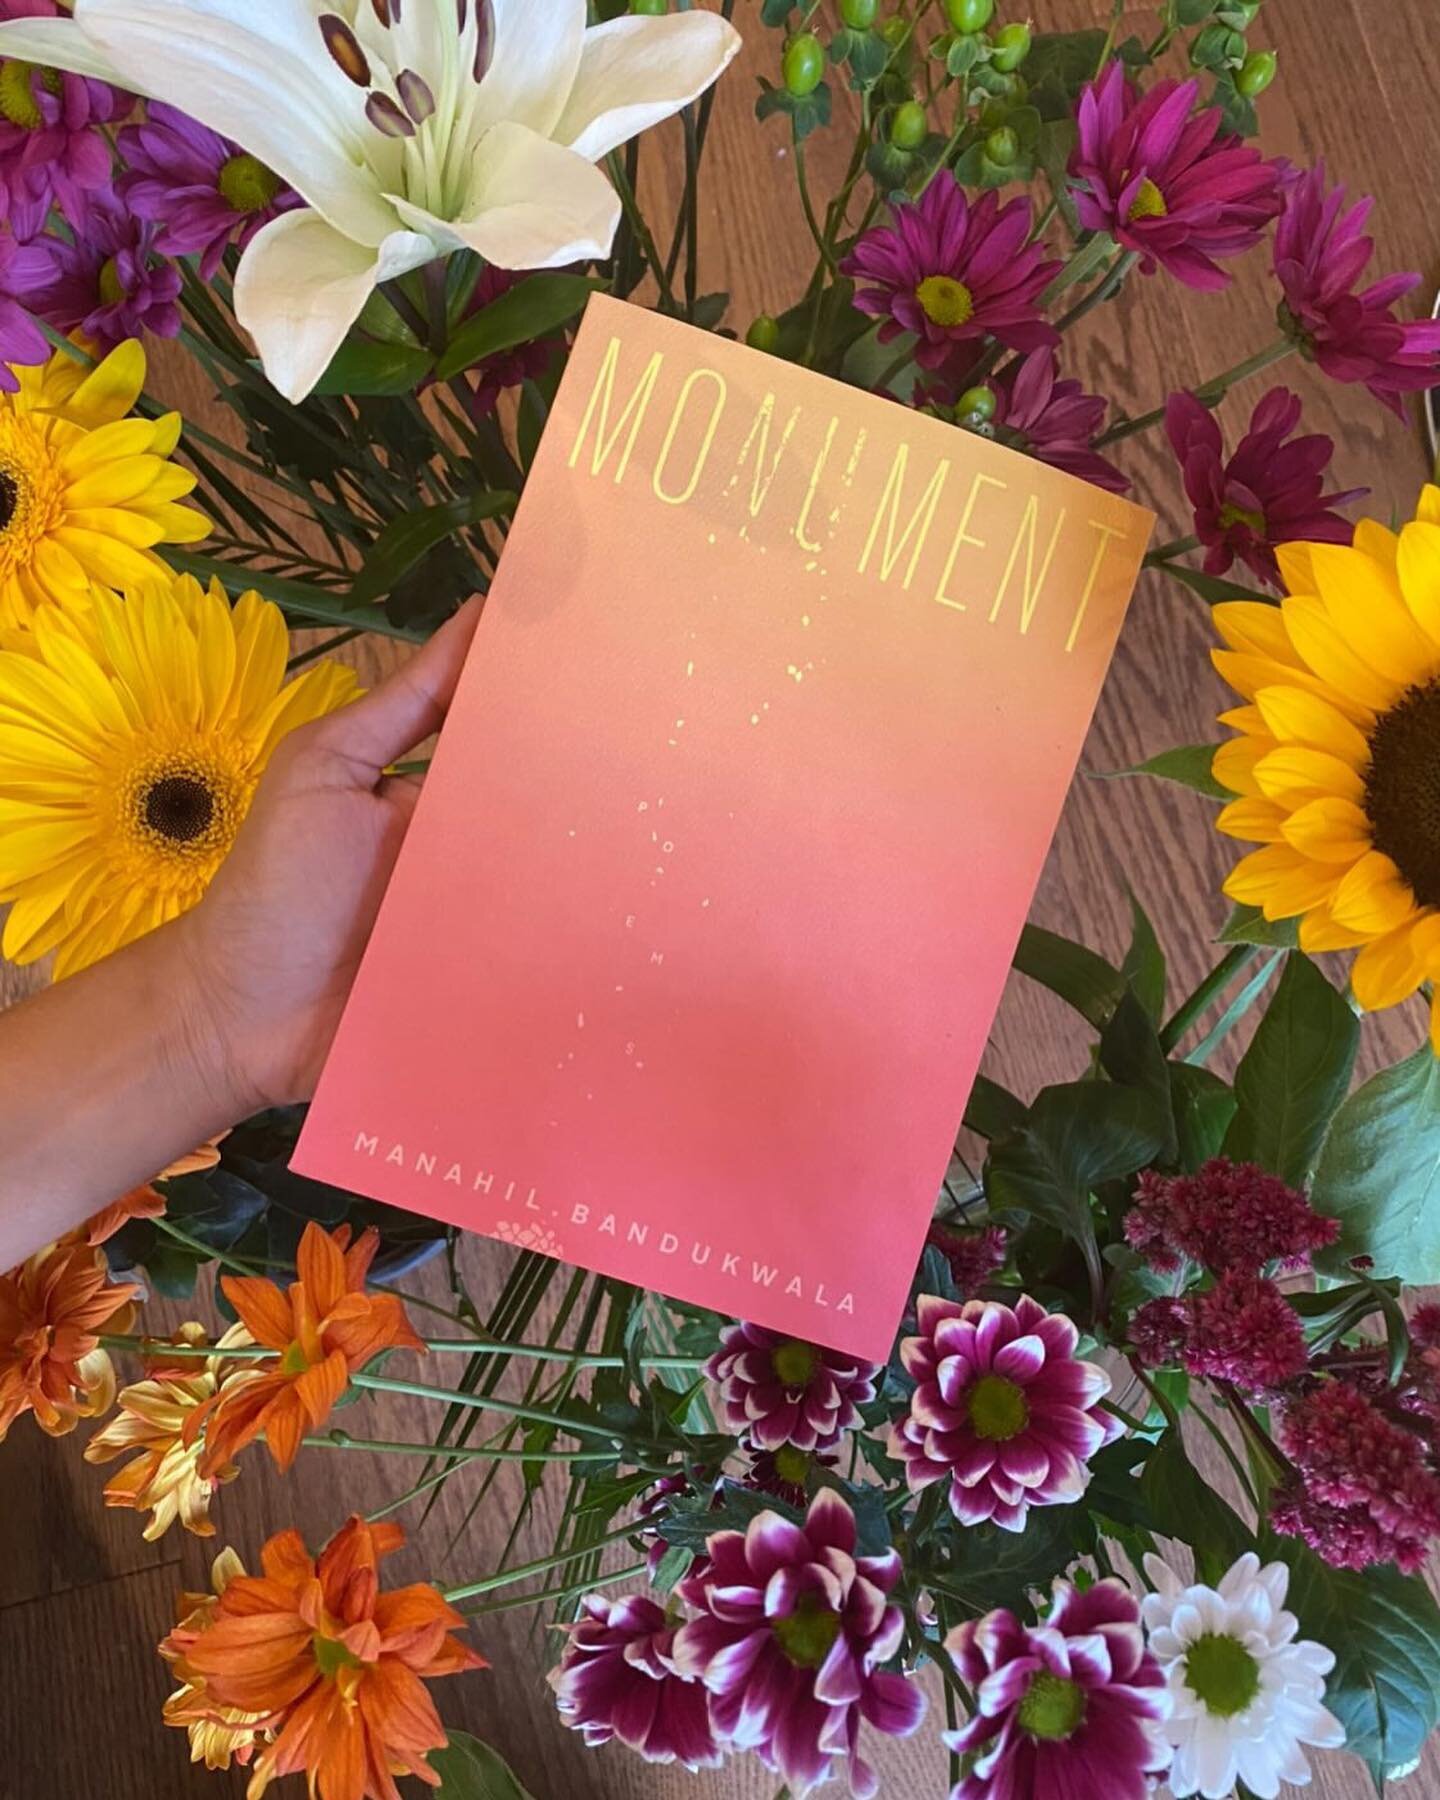 We love love love to see South Asian women publish their books. 
Have you had a chance to check out MONUMENT by @manahilbanduk with @brick.books 🧡?
🧡🧡🧡
Manahil Bandukwala is a writer and visual artist originally from Pakistan and now settled in C